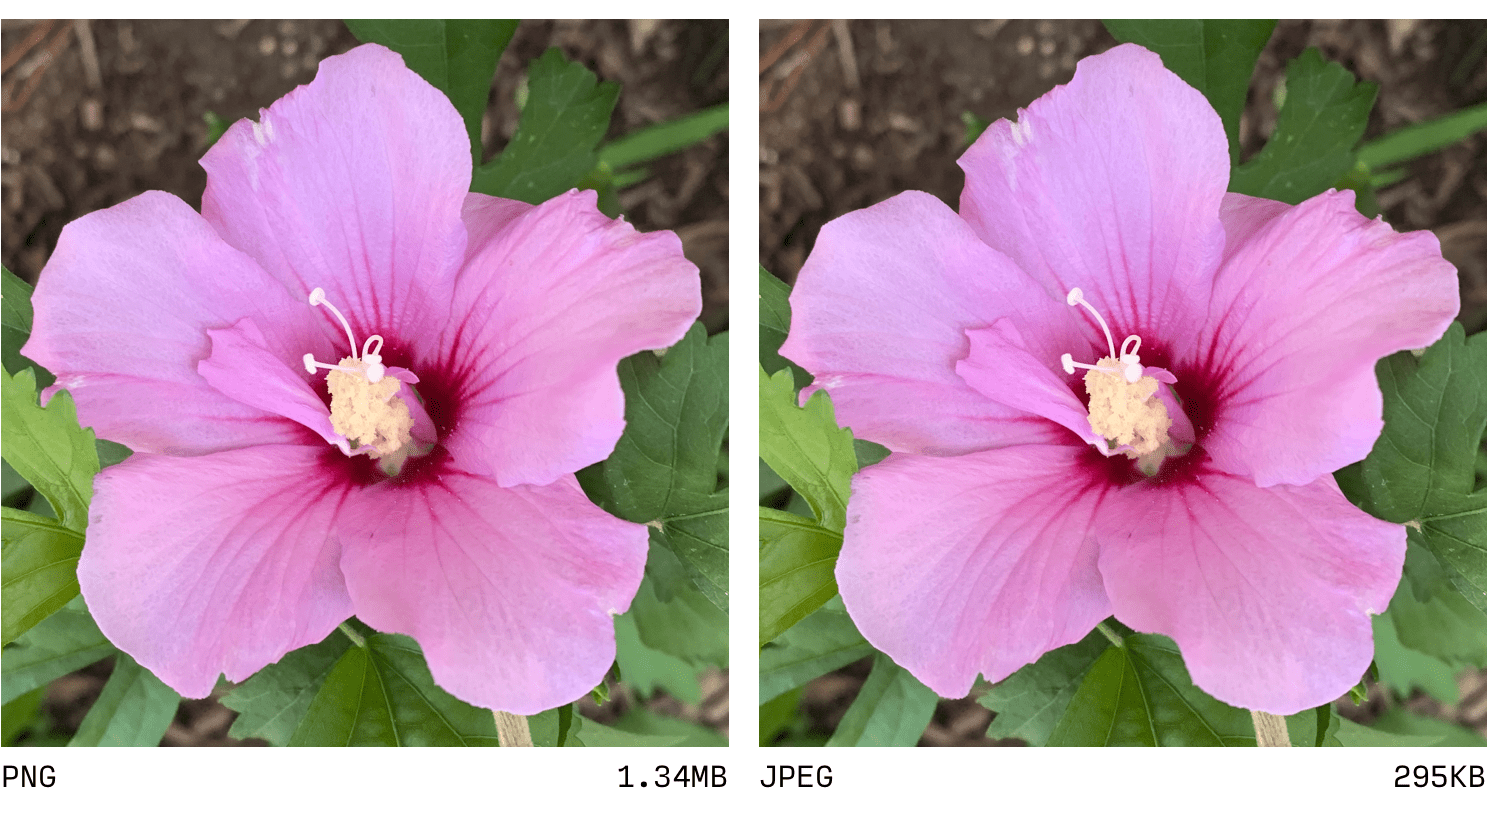 Comparison of JPEG and PNG.